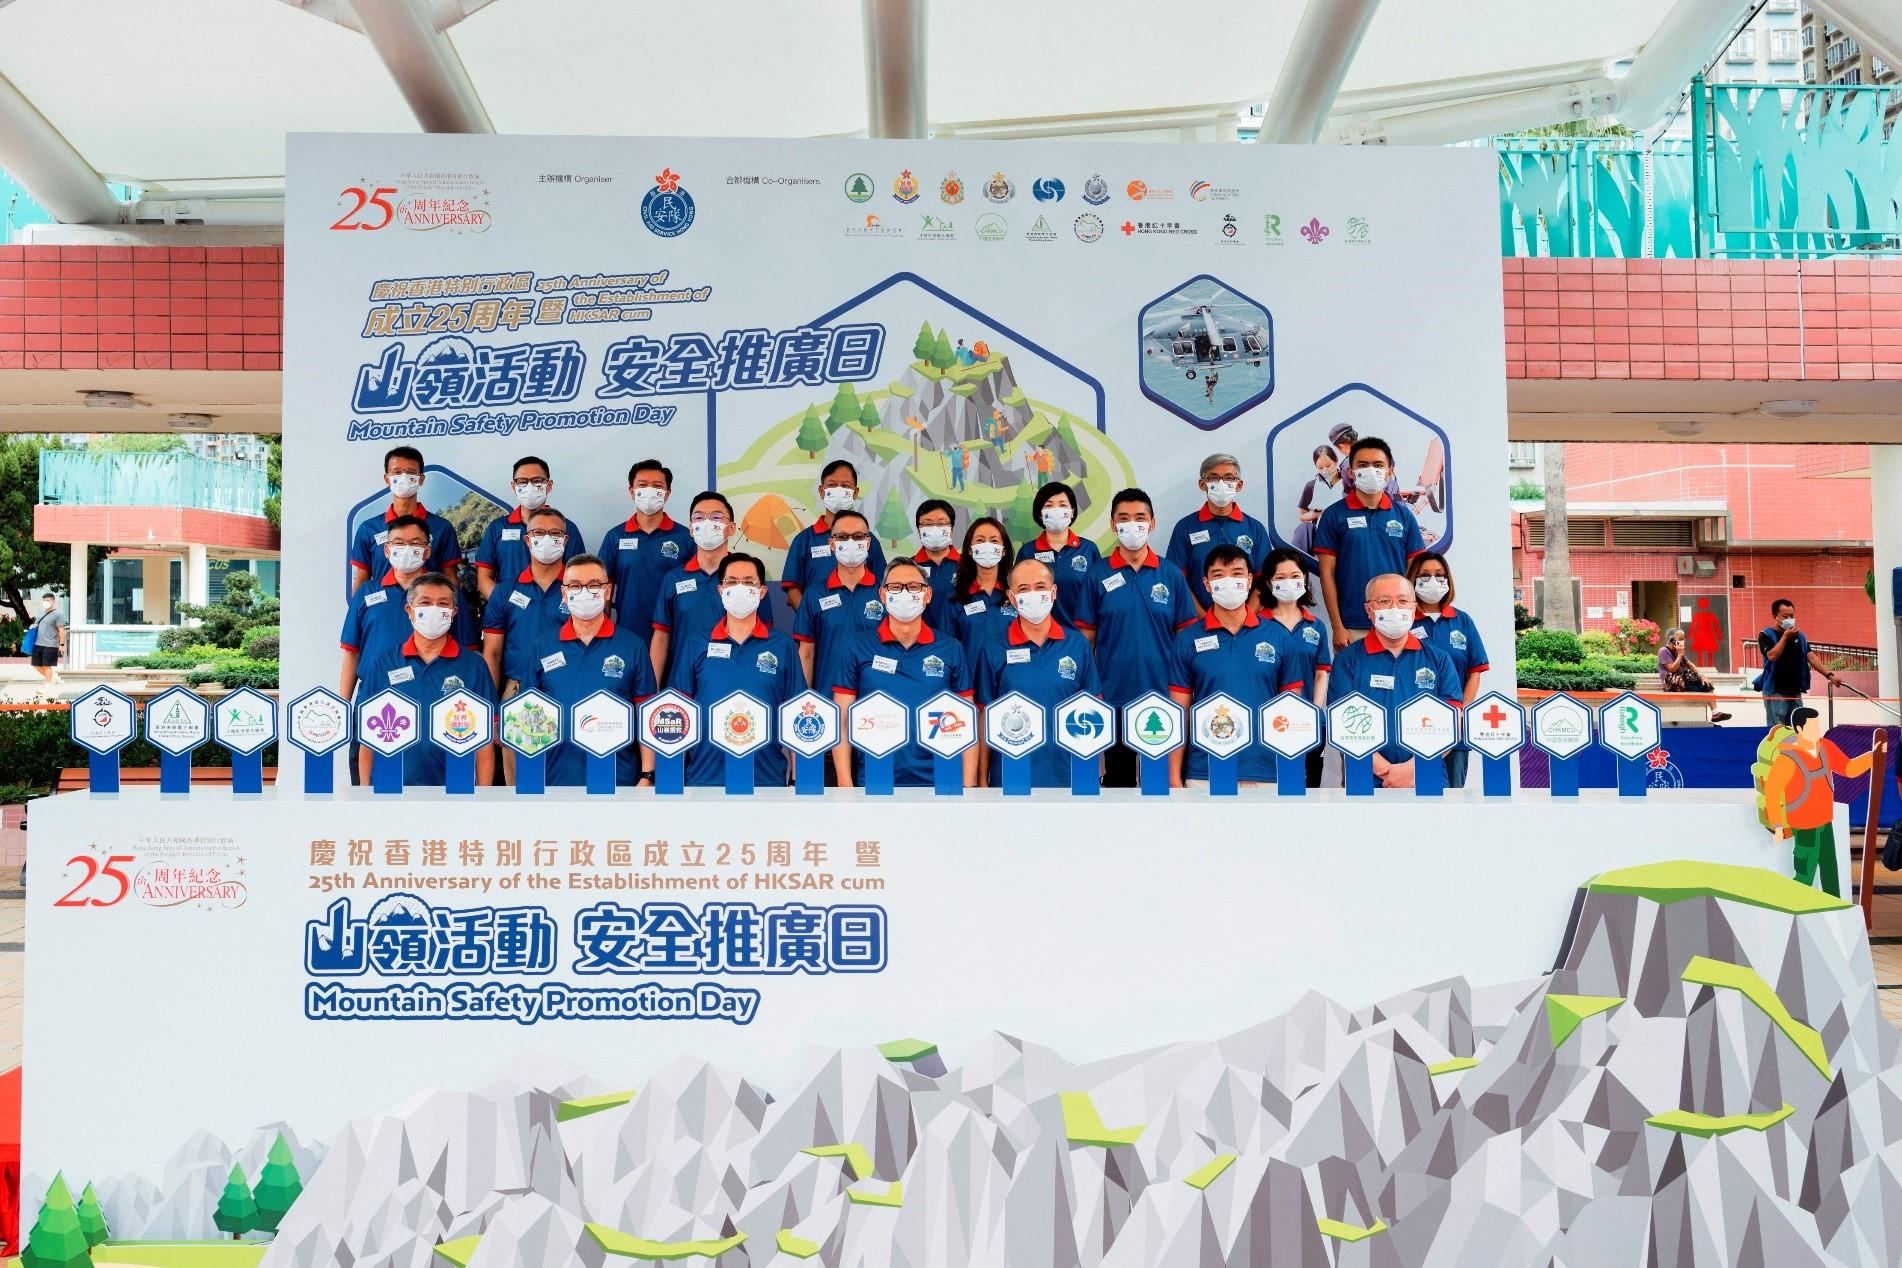 The Civil Aid Service held the 25th Anniversary of the Establishment of HKSAR cum Mountain Safety Promotion Day with various government departments and mountaineering organisations today (October 23) at Tuen Mun Cultural Square.  Photo shows the Under Secretary for Security, Mr Michael Cheuk Hau-yip, (front row, centre), and other guests officiating at the opening ceremony.